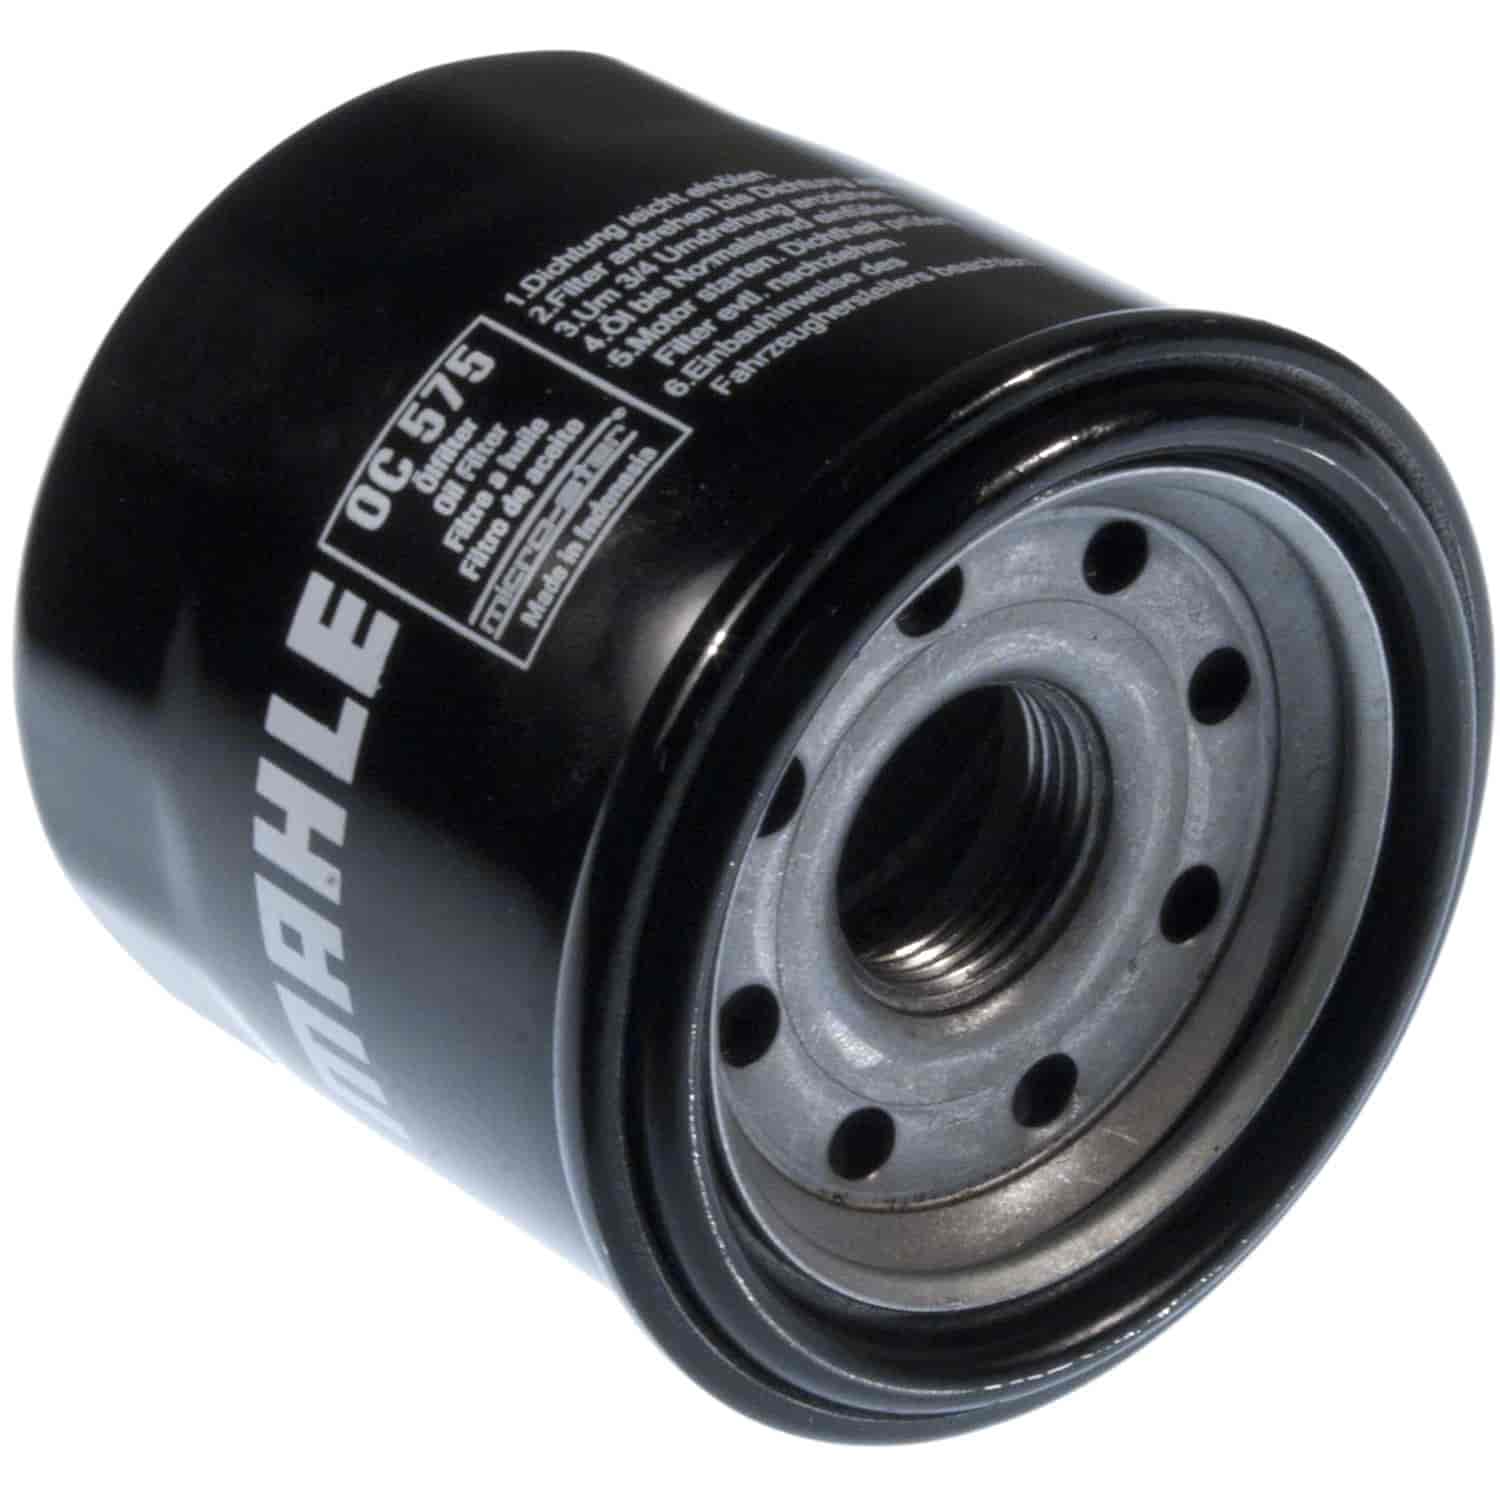 Mahle Oil Filter Various Asian M/C Applications